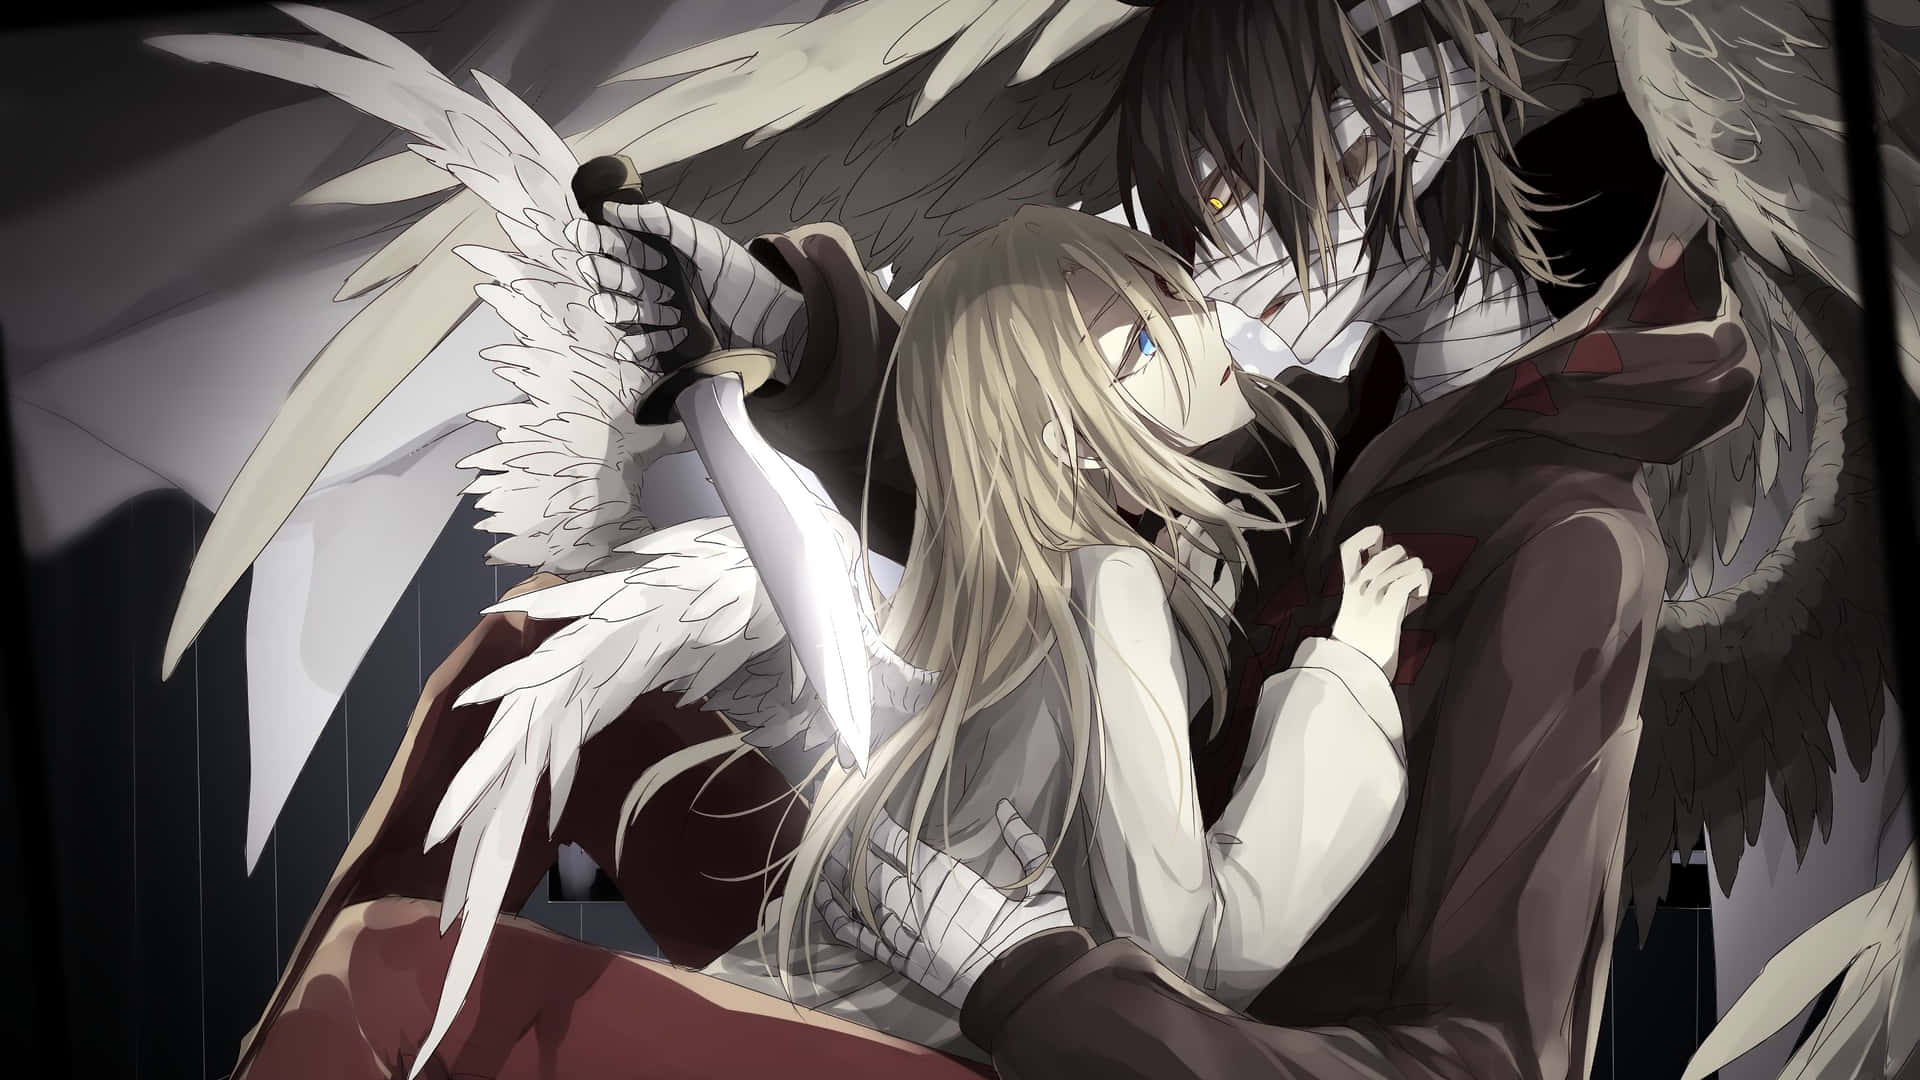 100+] Angels Of Death Backgrounds